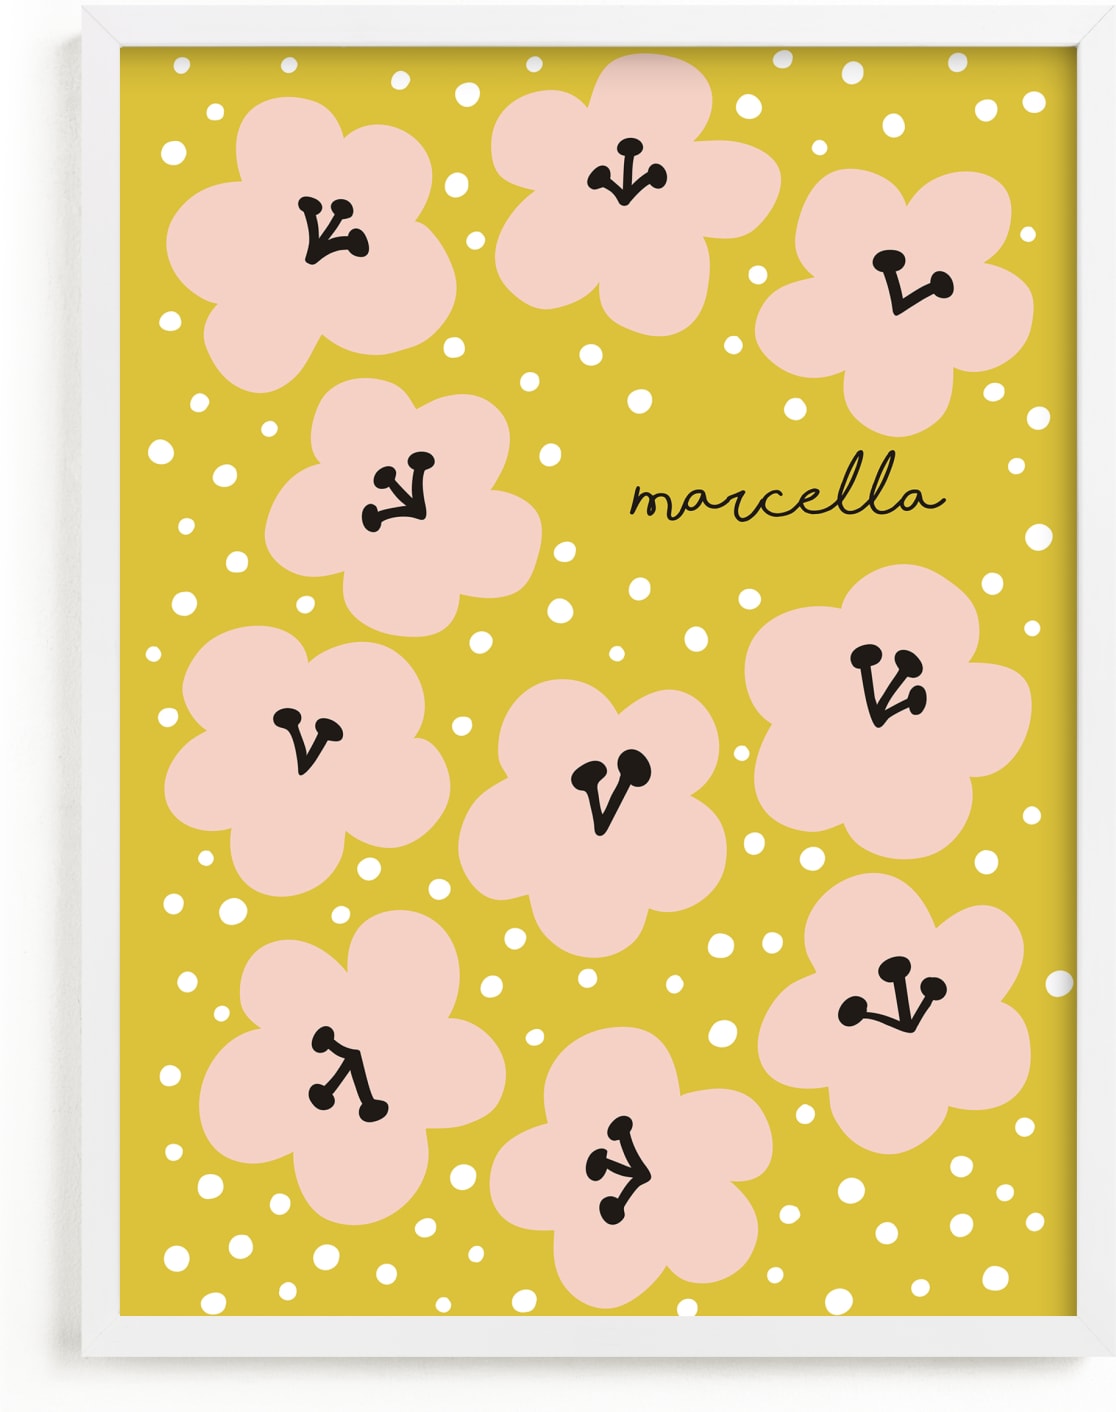 This is a yellow, pink personalized art for kid by Nieves Herranz called Marcella.